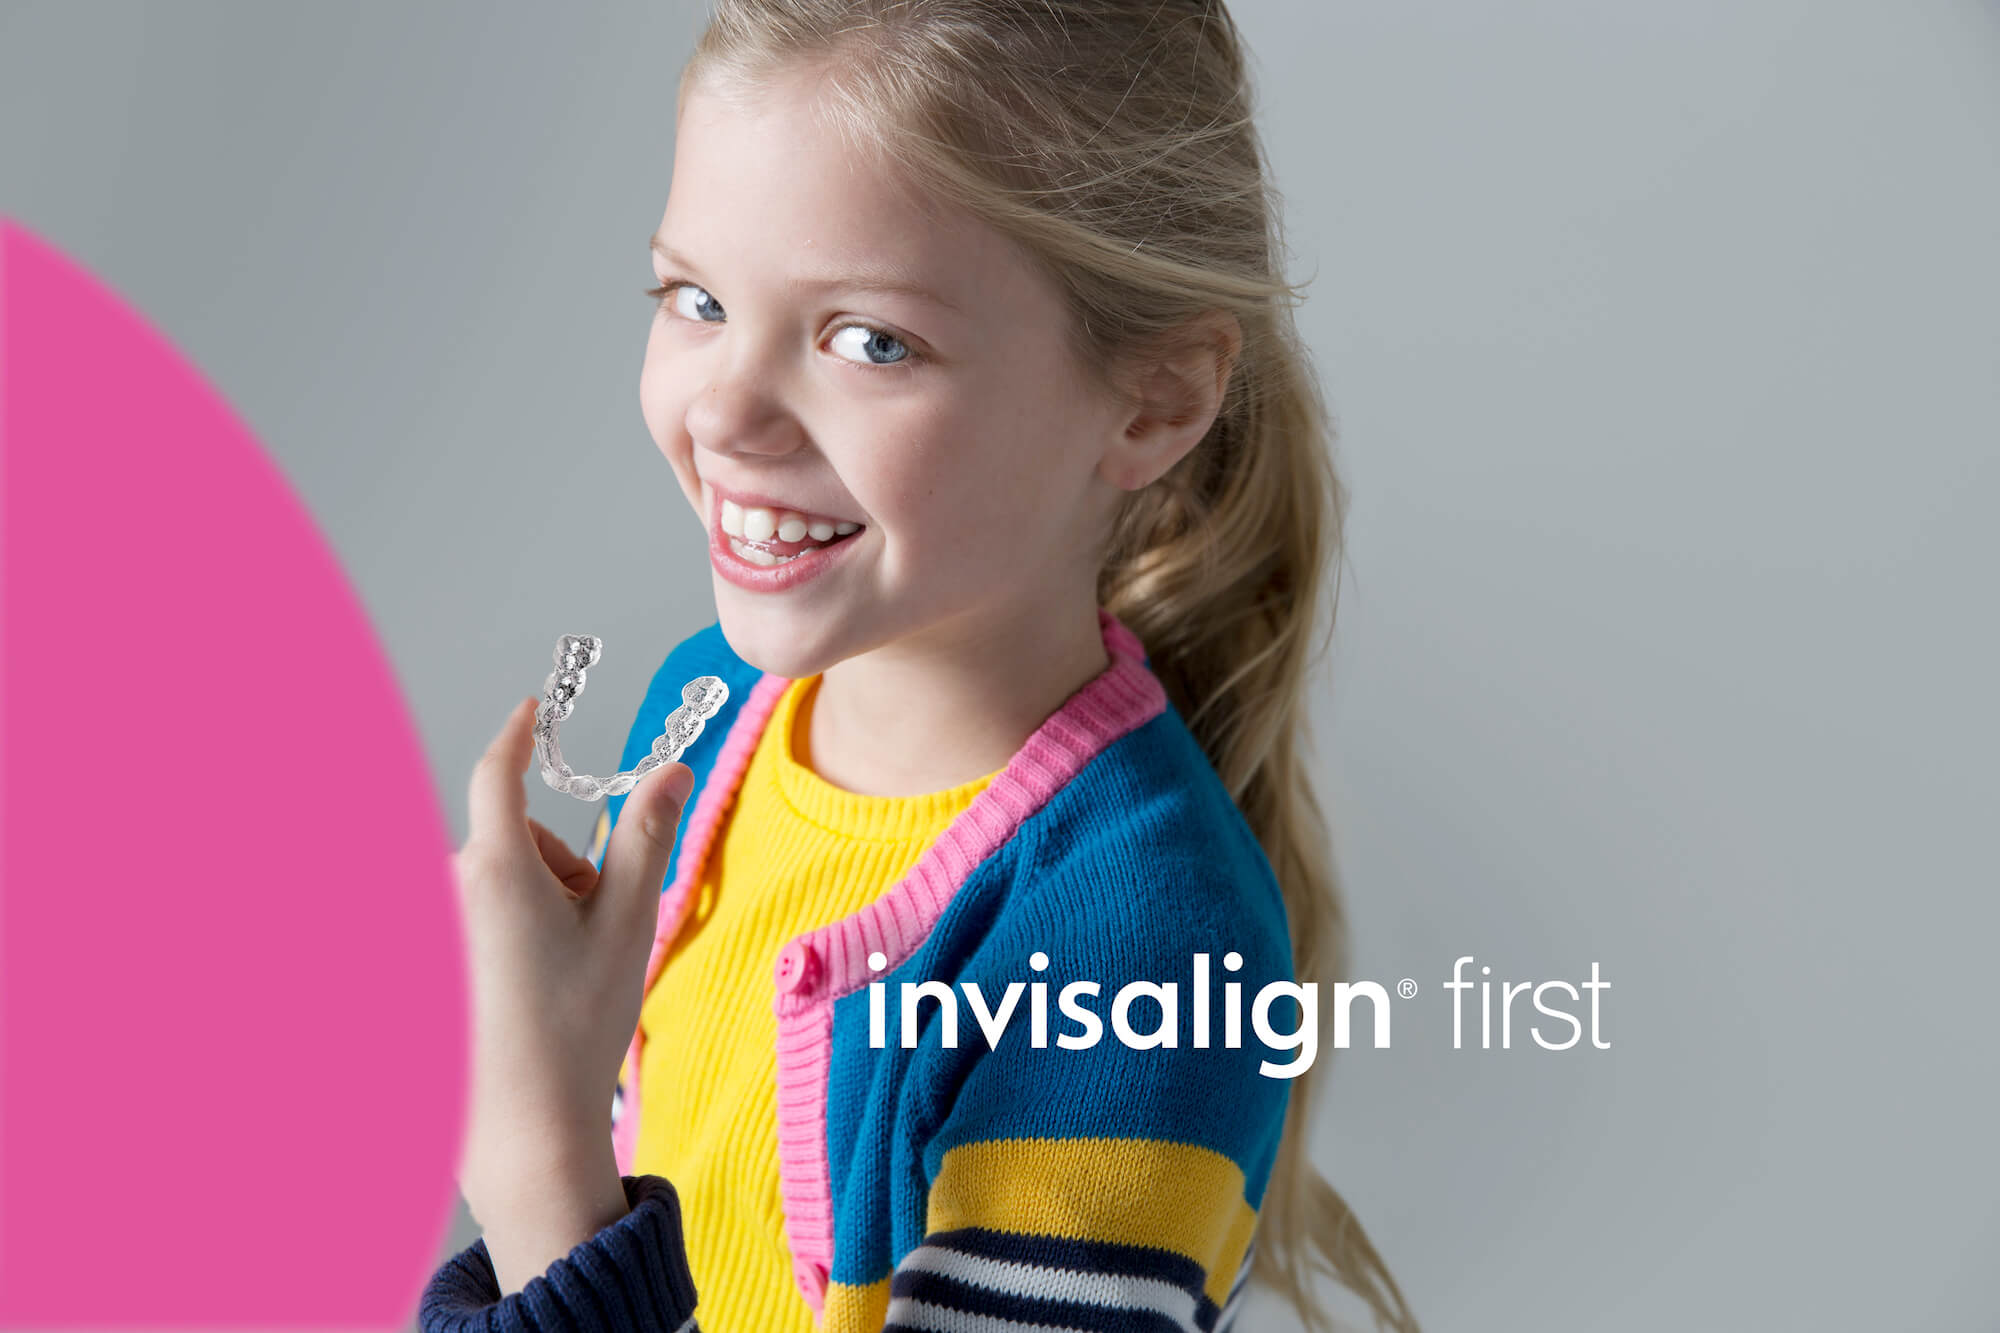 Invisalign First - Ages 7 - 12 Years, Dr. Dona Seely